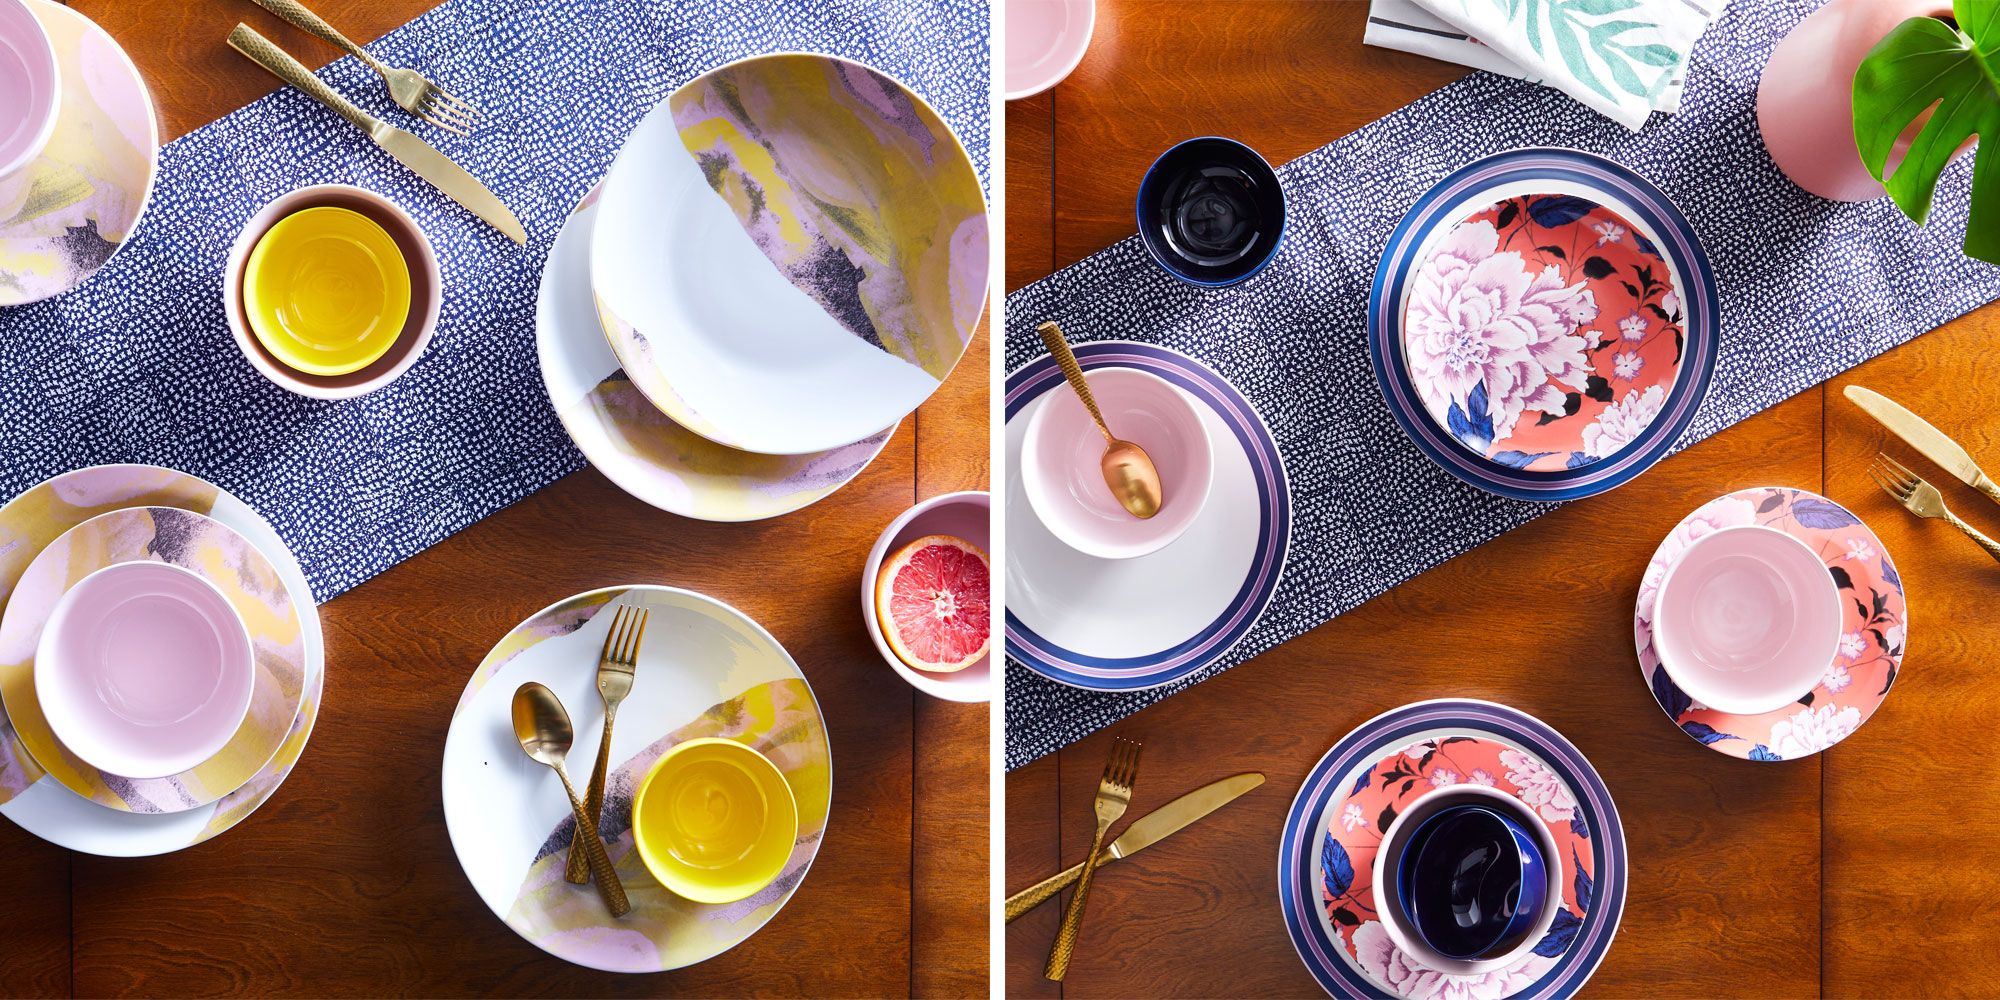 New Beautiful Lavender Kitchenware by Drew Barrymore - Walmart Finds